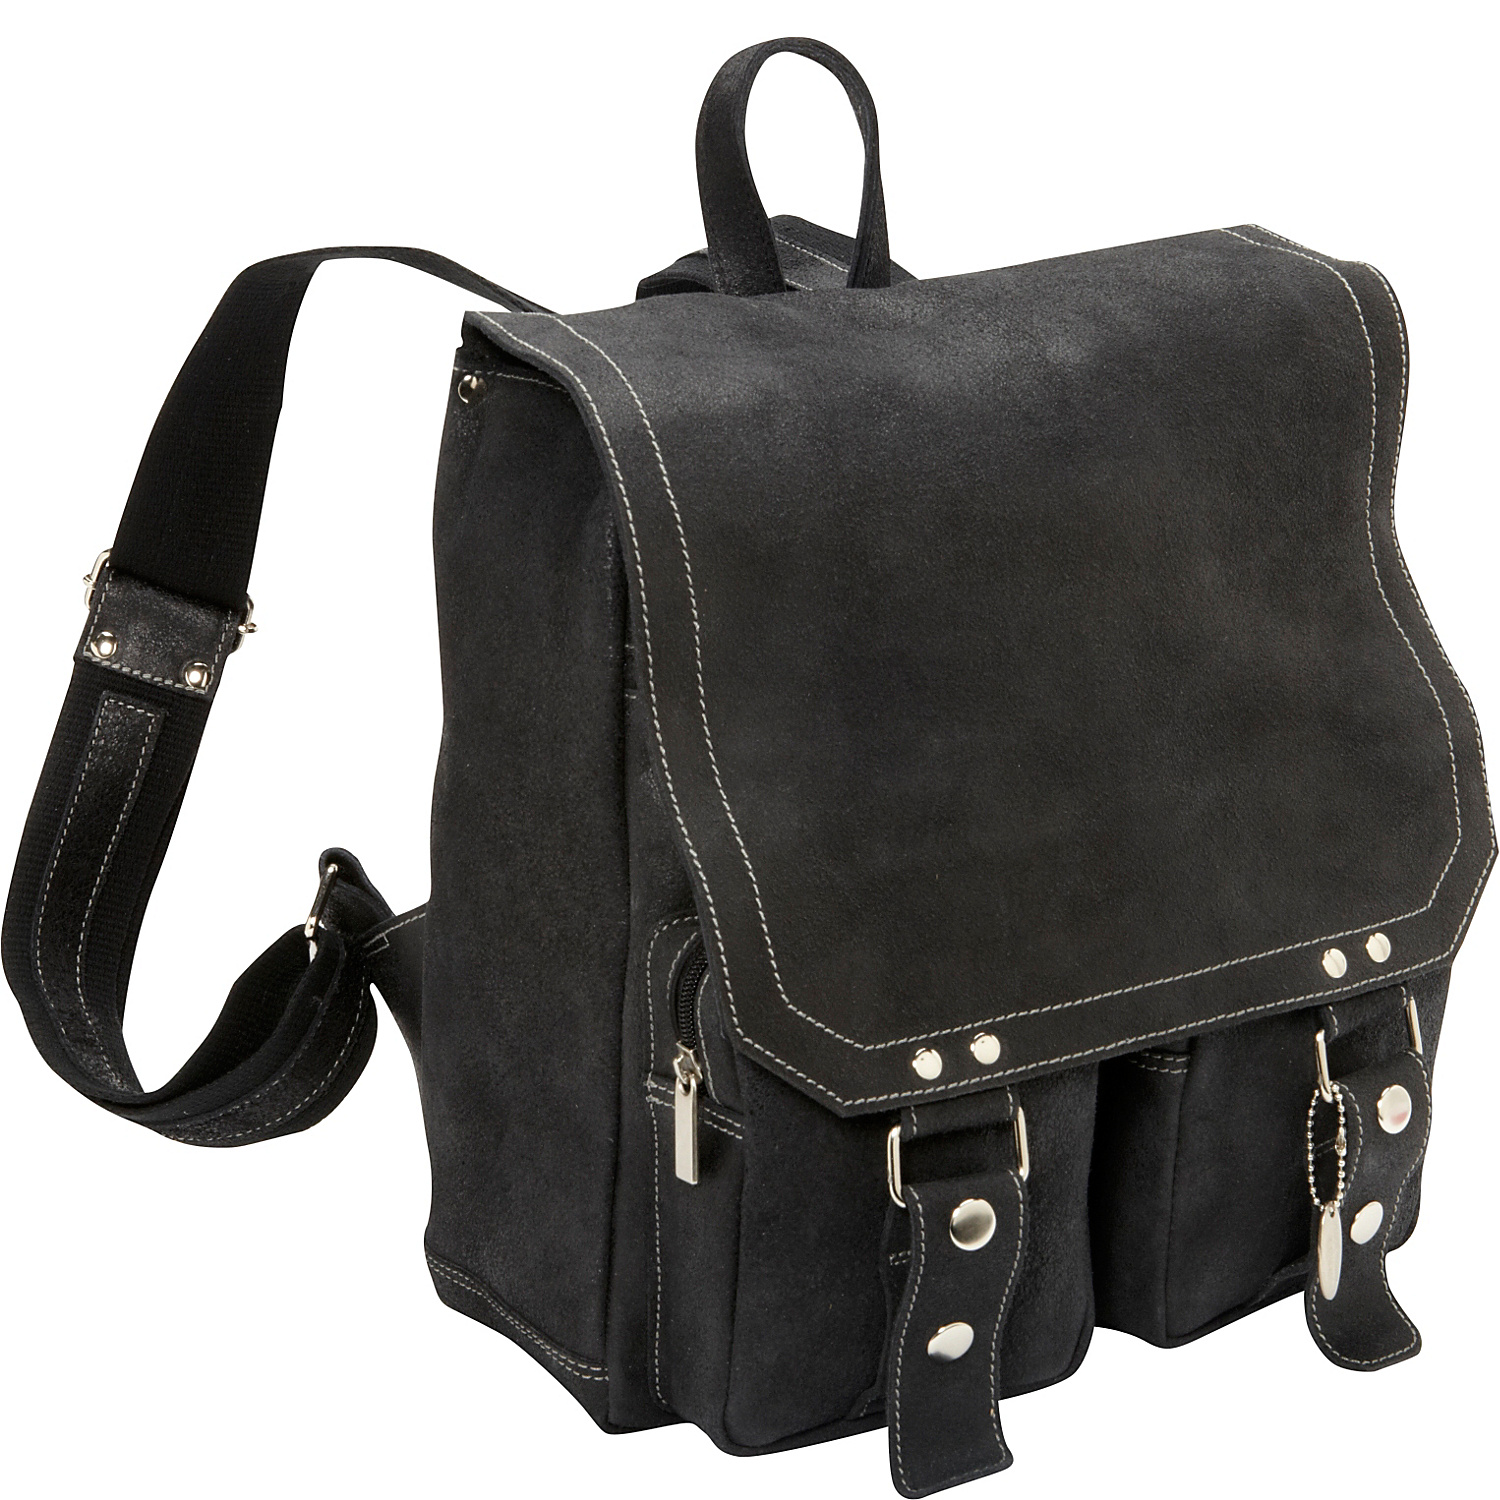 Distressed Leather Laptop Backpack